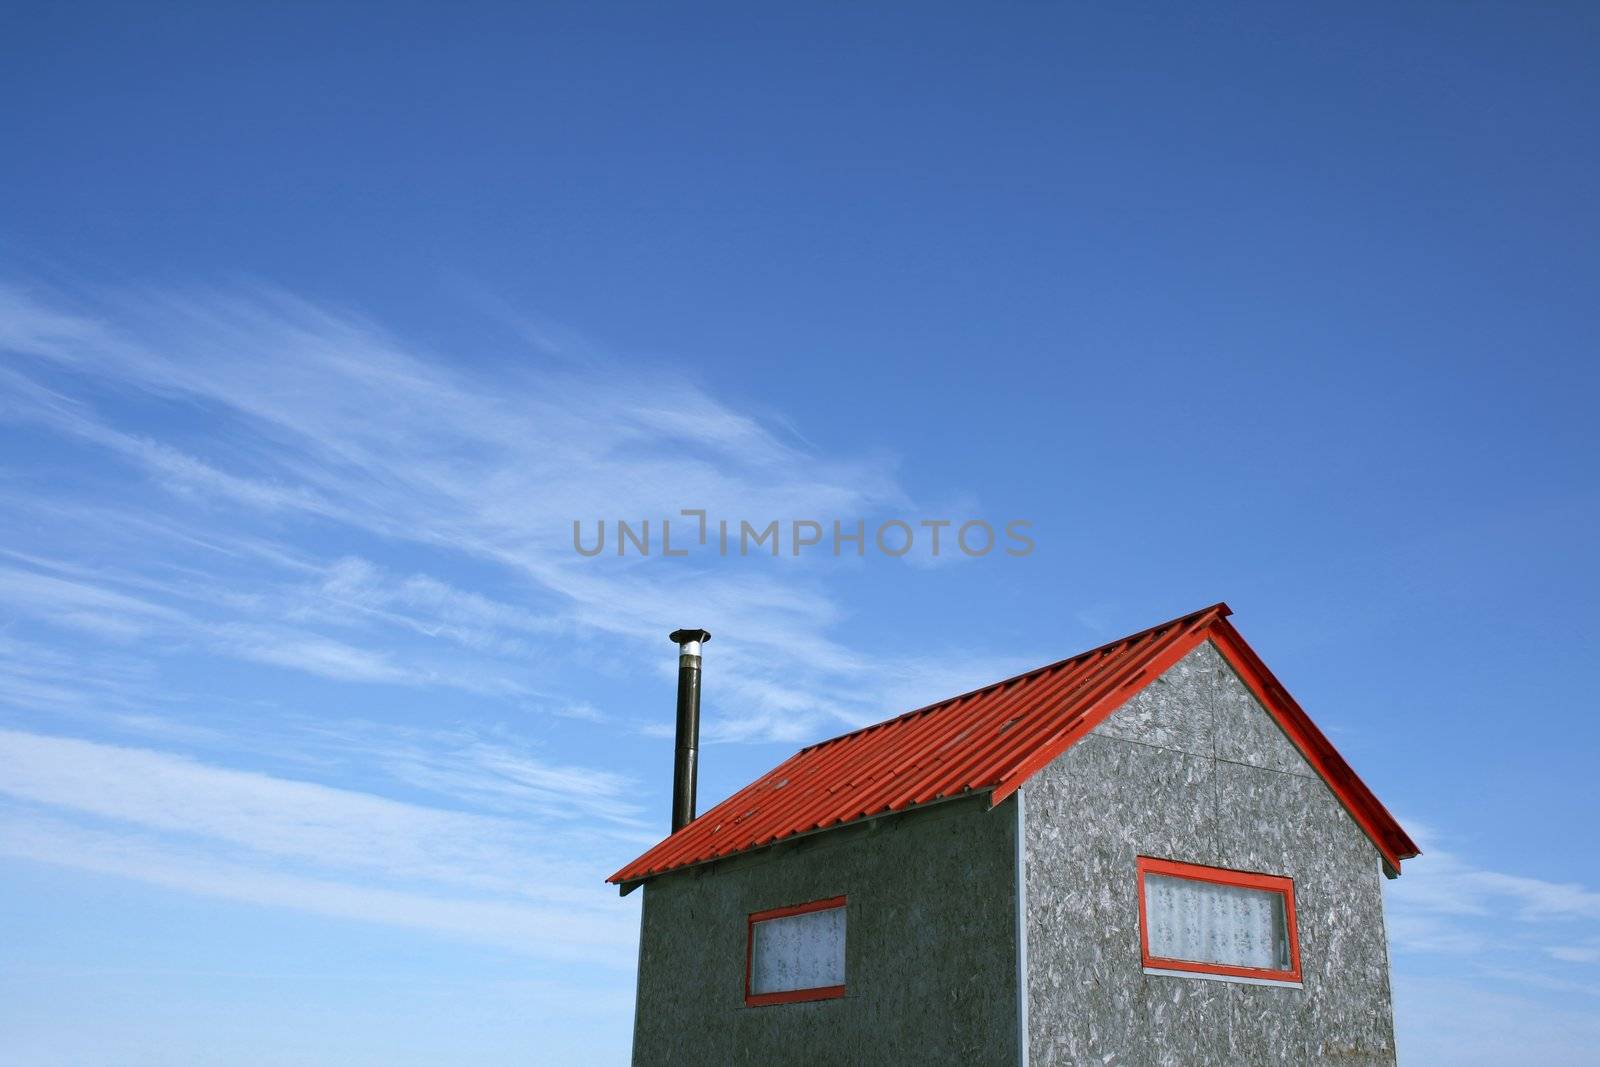 Little house with red roof and chimney and spacious blue sky (ice fishing hut).